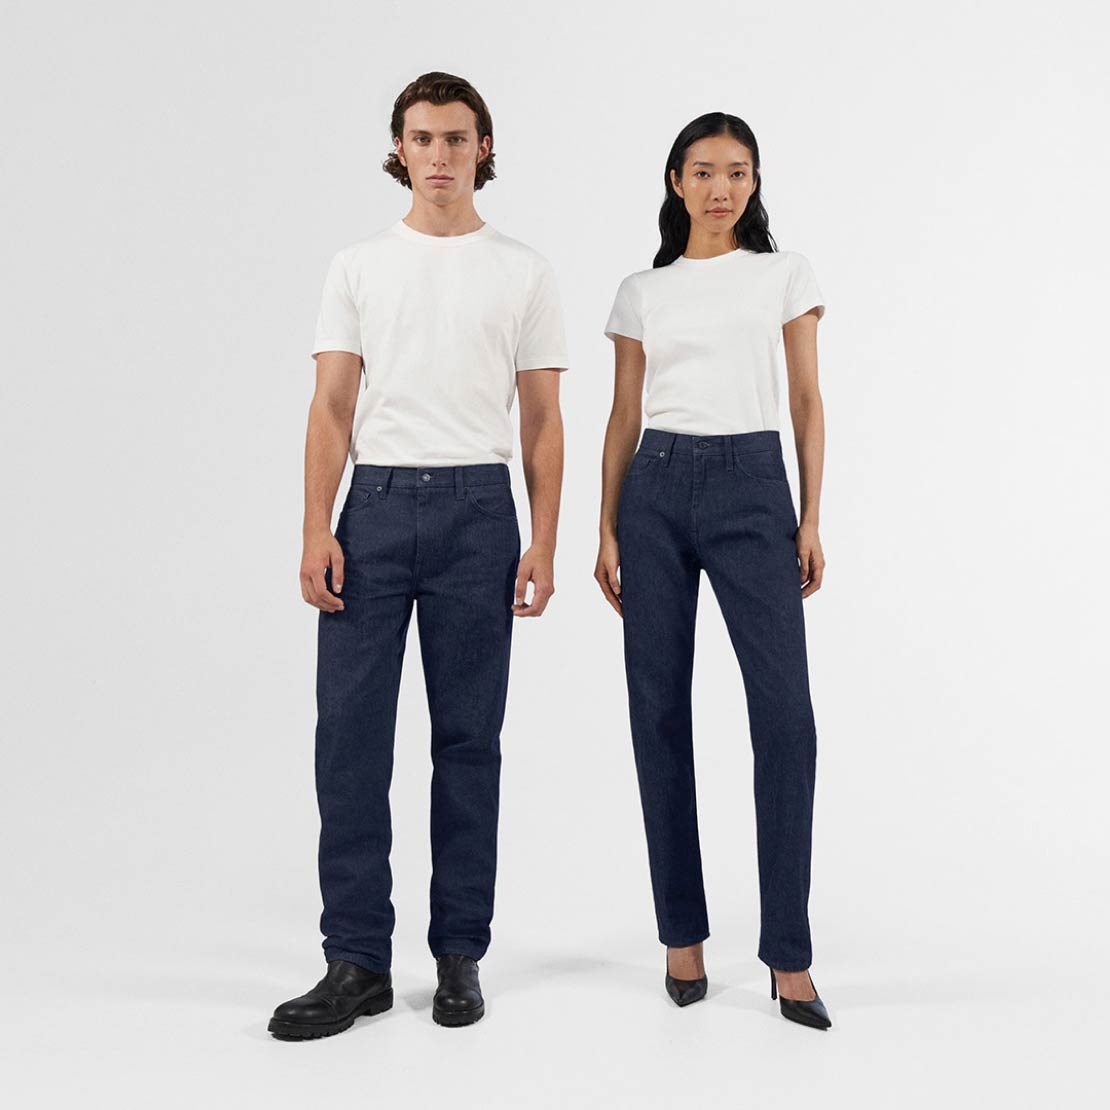 UNIQLO and HELMUT LANG